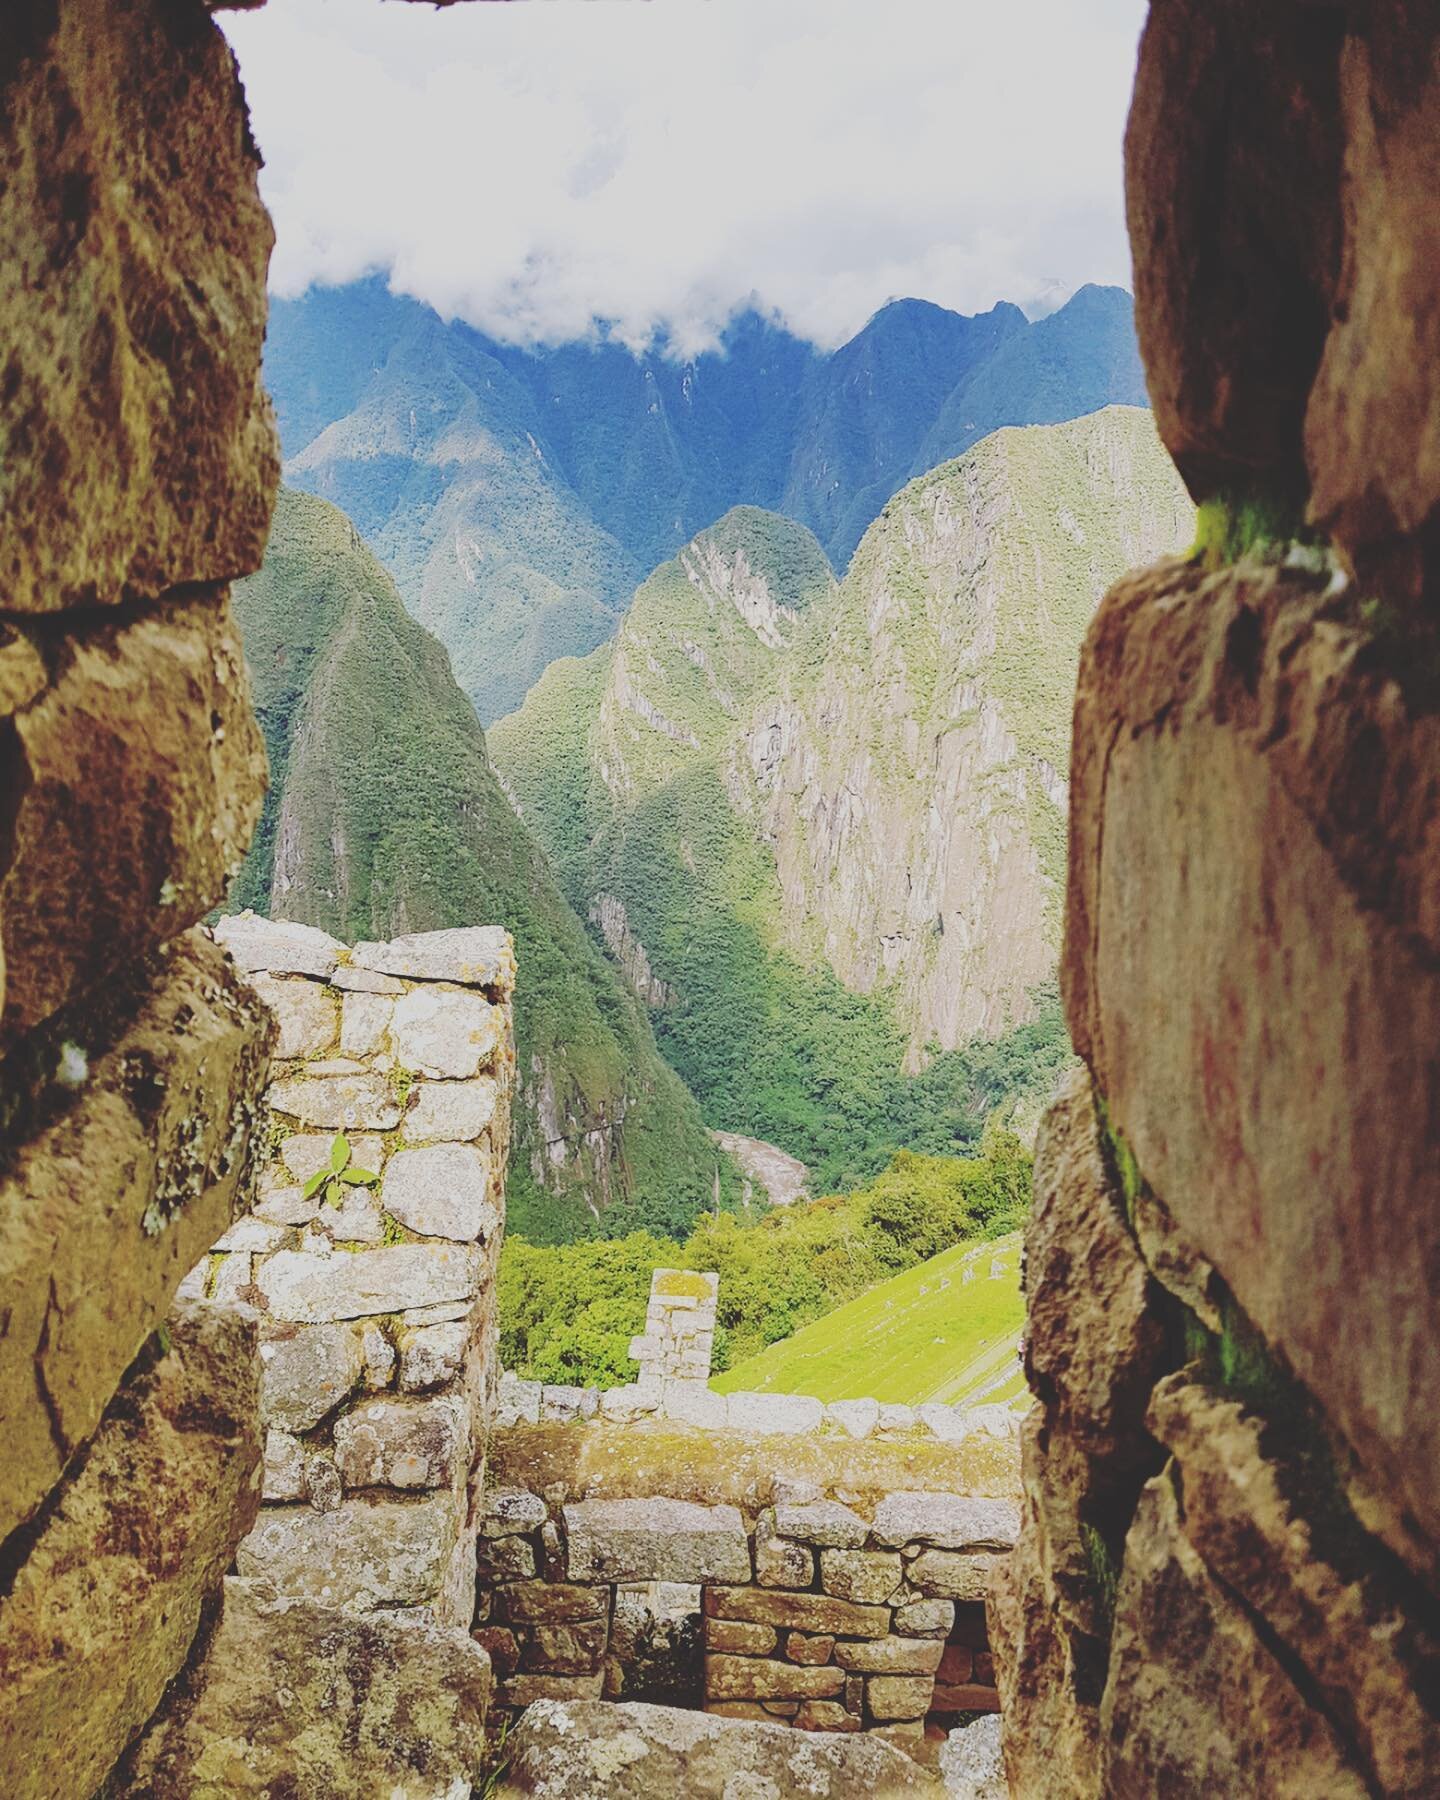 Peru. A country of contrasts. Snow capped mountains and tropical rivers, ancient cultures and contemporary fusion cuisine - with so much to explore and something for everyone. I feel incredibly lucky to have just spent another life-affirming week her